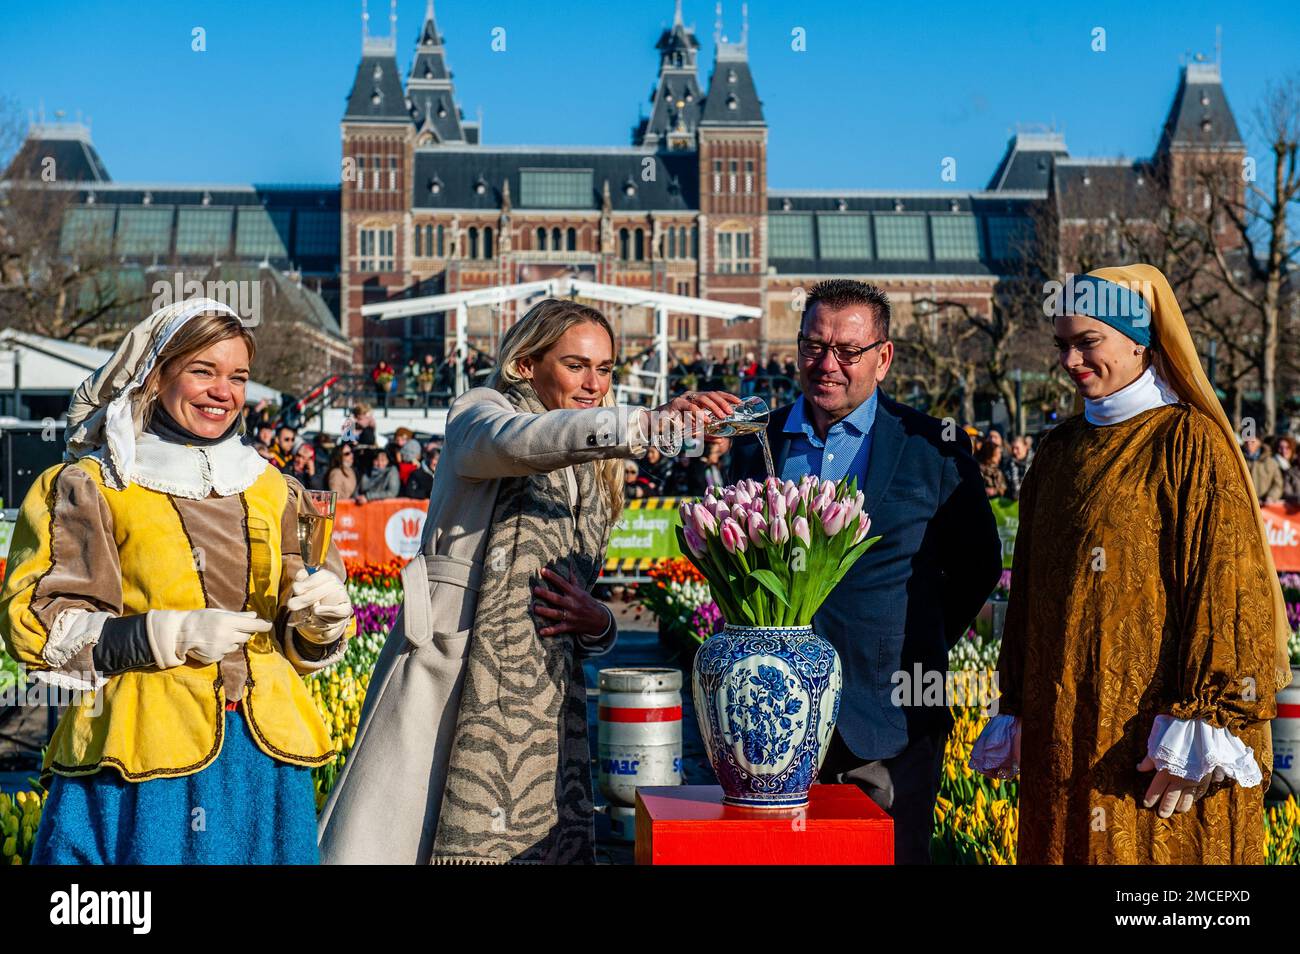 Olympic skating champion, Irene Schouten (middle) seen christening a new tulip: Tulipa 'Dutch Pearl'. Each year on the 3rd Saturday of January, the National Tulip Day is celebrated in Amsterdam. Dutch tulip growers built a huge picking garden with more than 200,000 colorful tulips at the Museumplein in Amsterdam. Visitors are allowed to pick tulips for free. The event was opened by Olympic skating champion, Irene Schouten. Prior to the opening, she christened a new tulip: Tulipa 'Dutch Pearl' as a reference to the world - famous painting 'The girl with a pearl earring' by Johannes Vermeer. Stock Photo